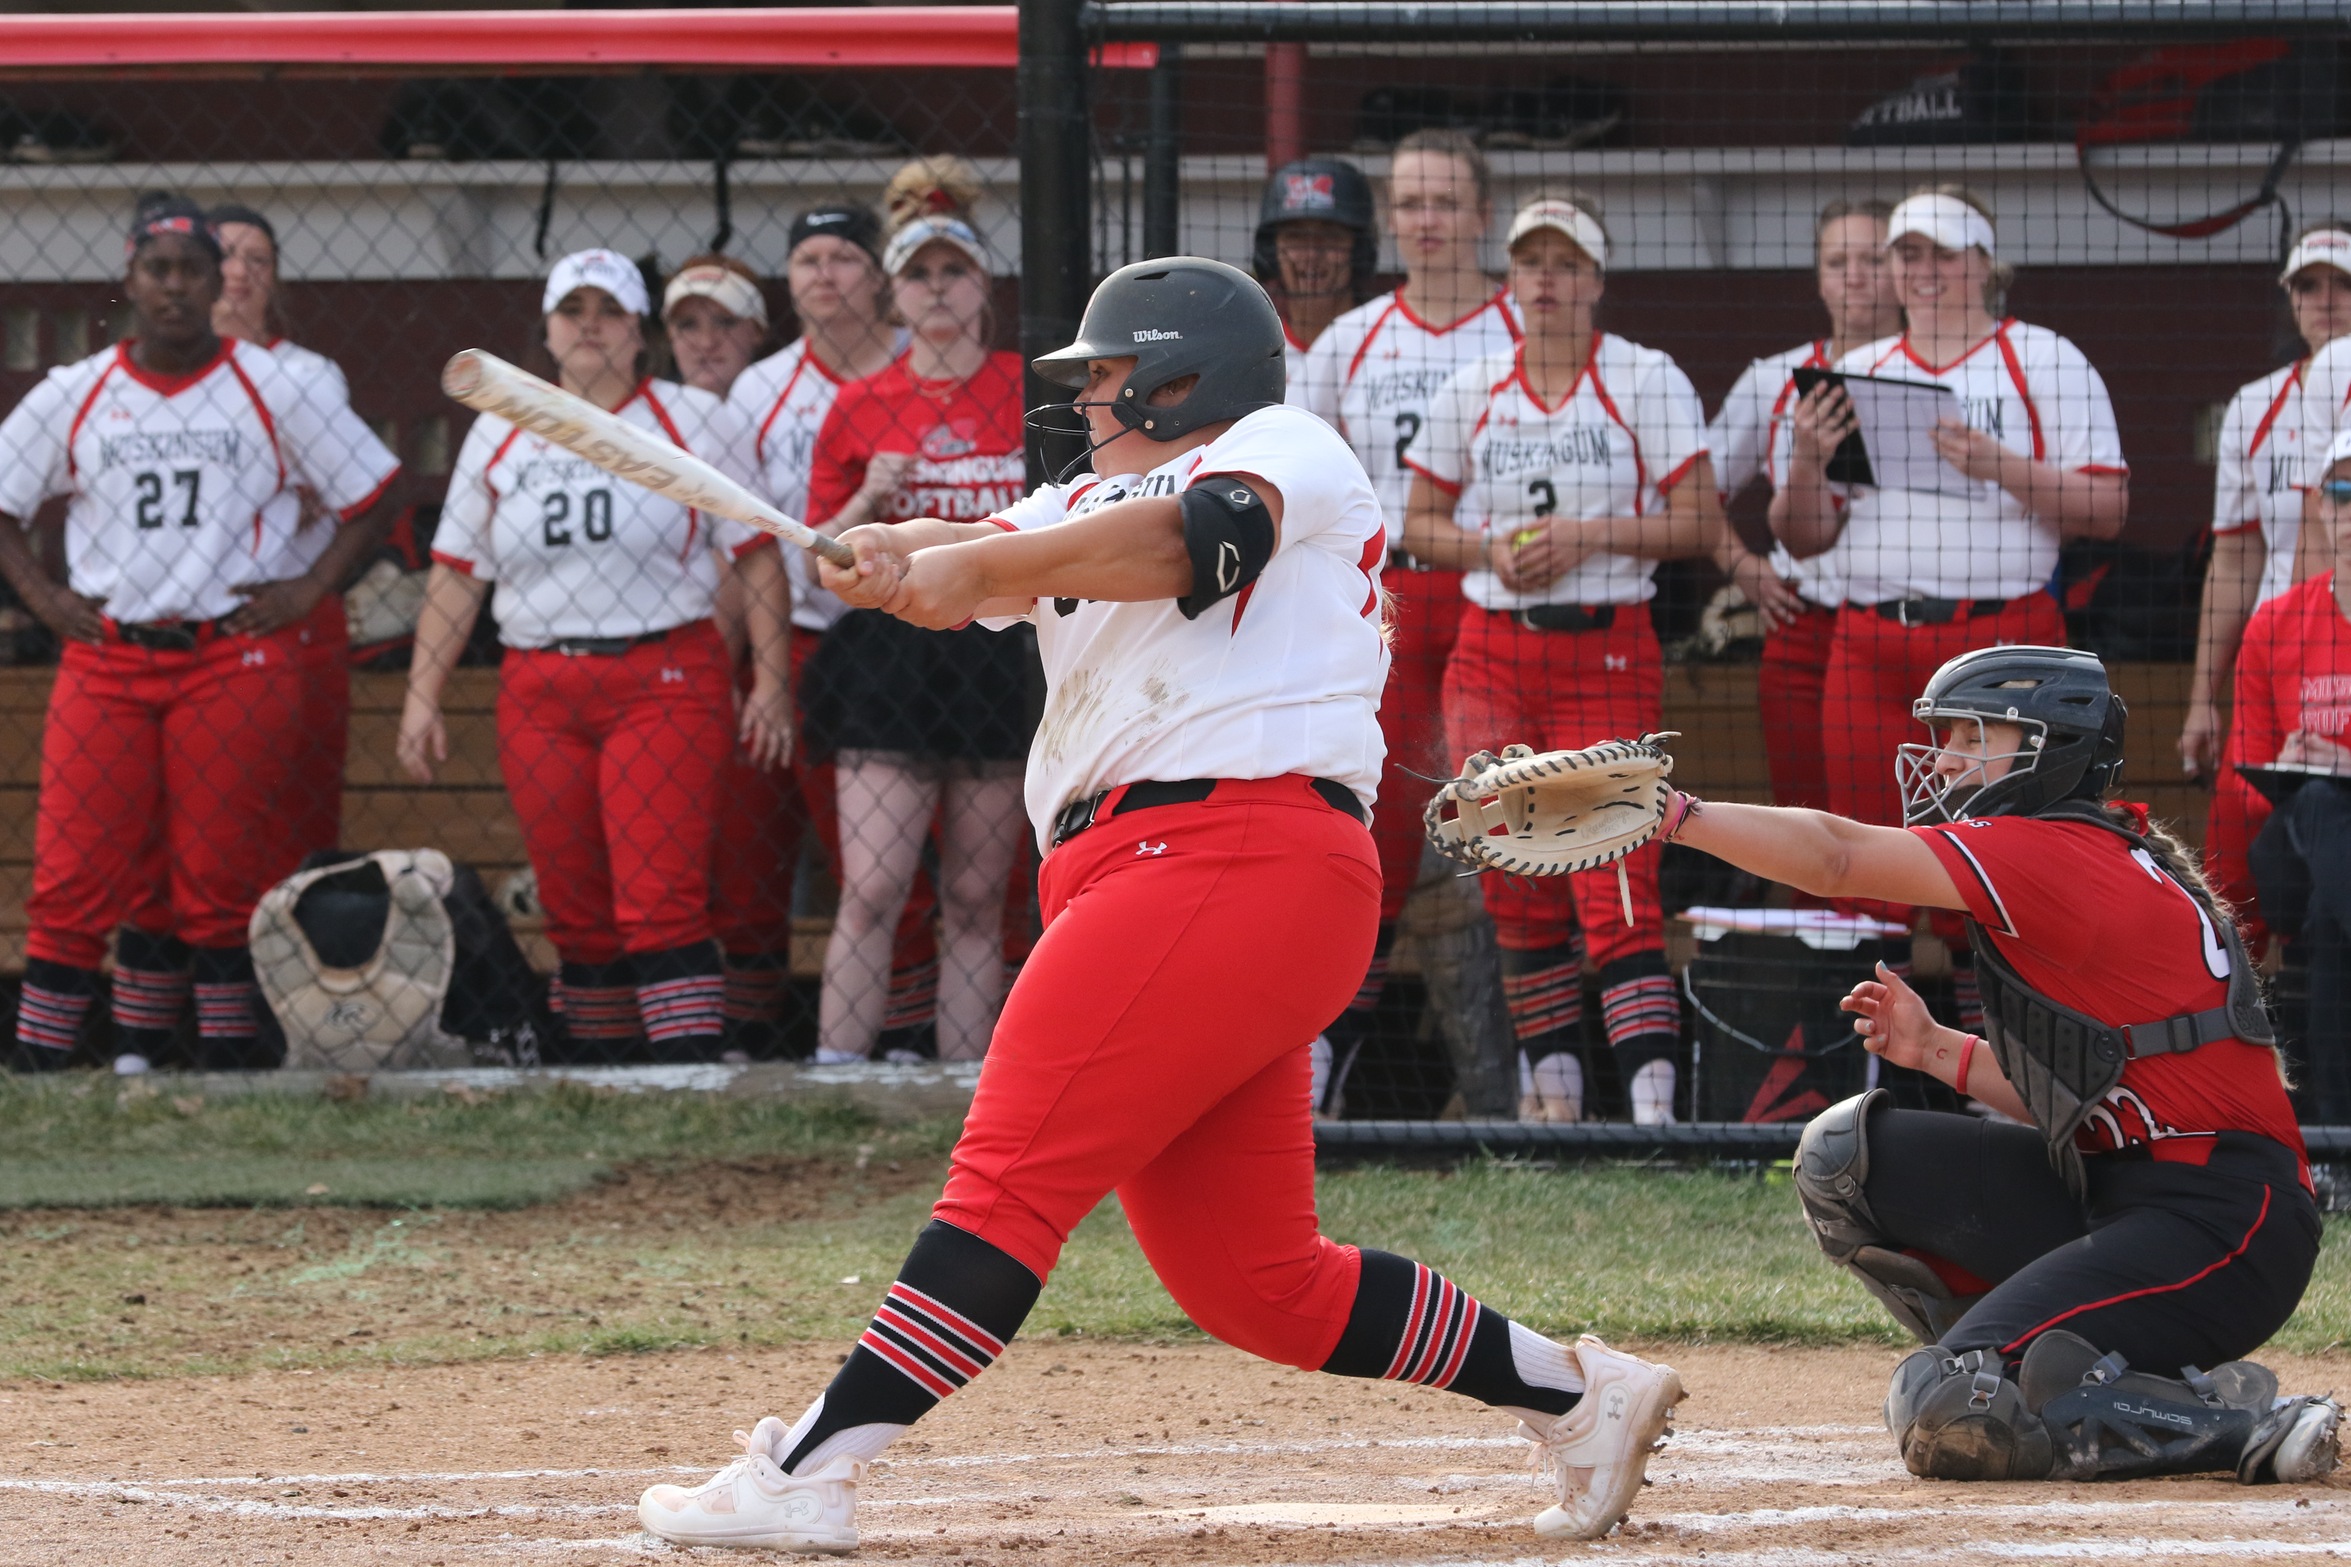 24th-ranked softball splits day at Pioneer Classic